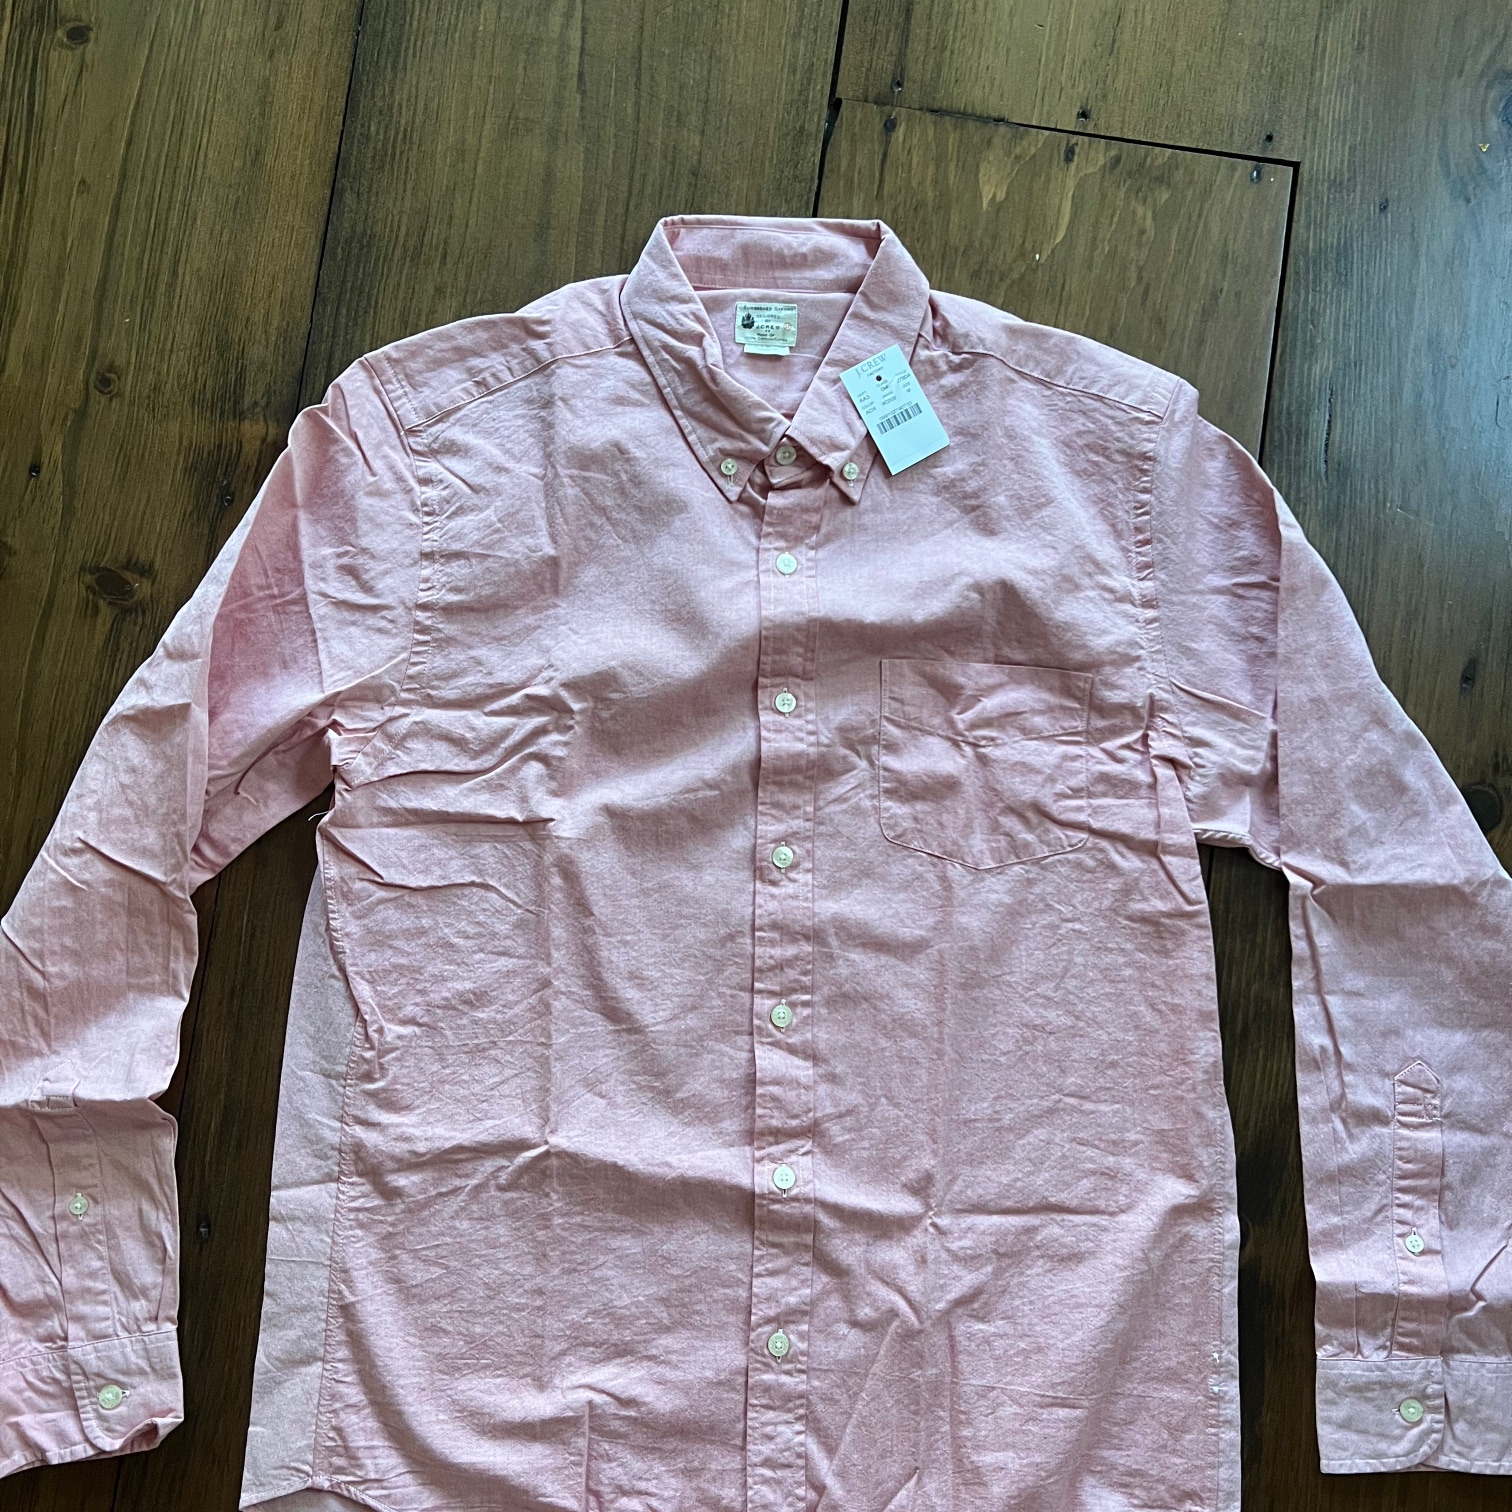 J Crew  Men's Button Down Cotton Shirt. Pink. Medium. New with Tags